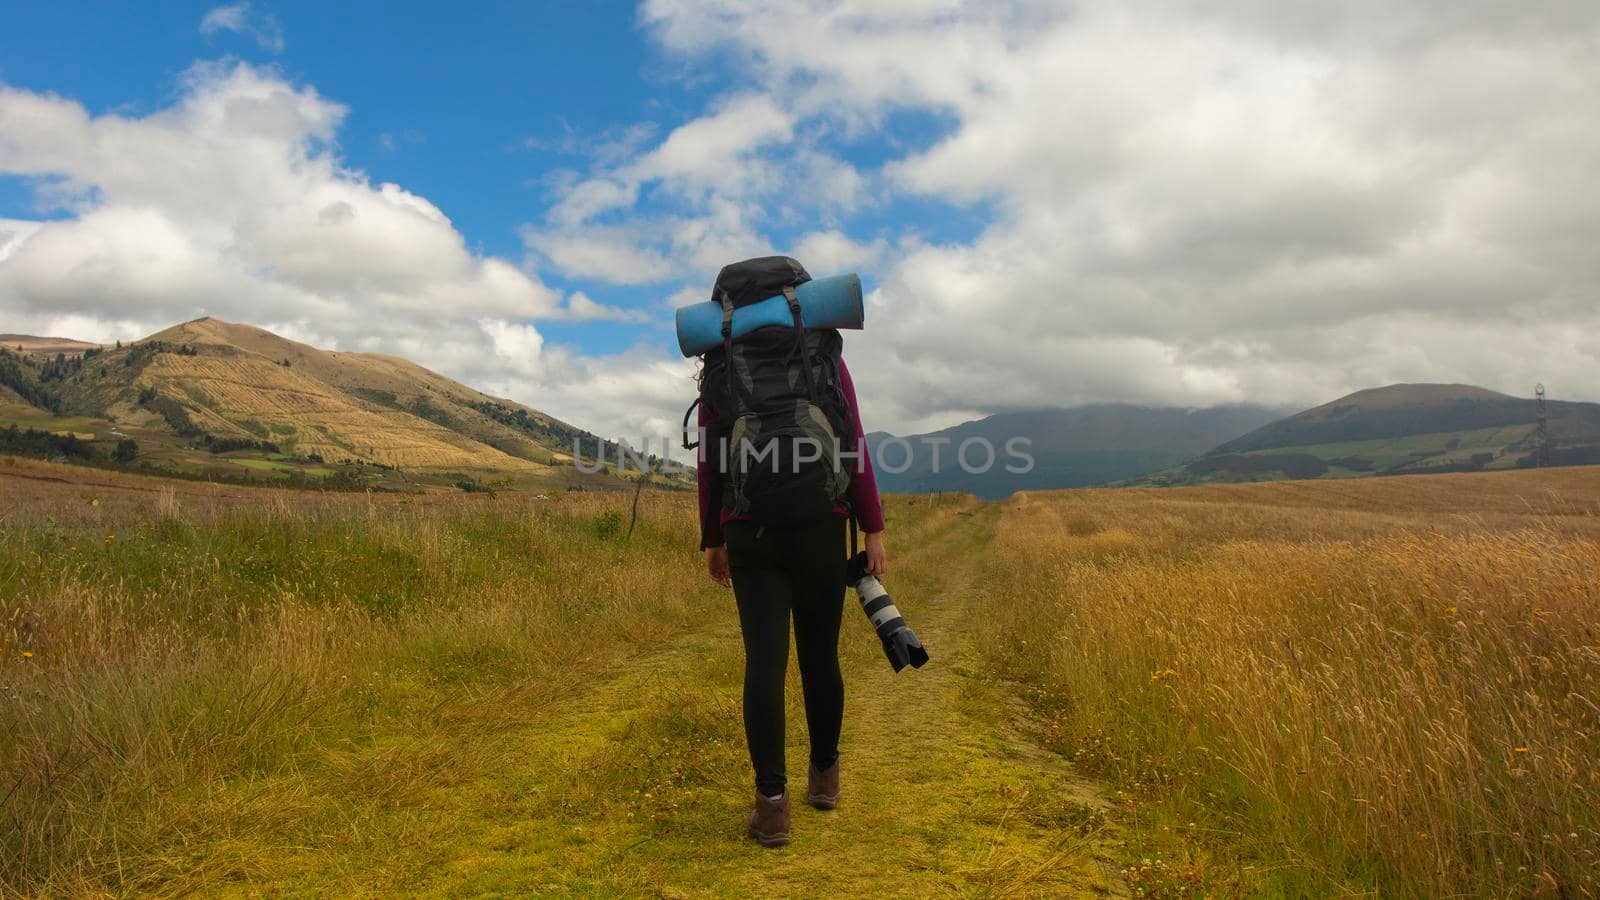 Beautiful Hispanic female explorer seen from behind with backpack walking with a camera in hand in the middle of a sown field on a cloudy morning